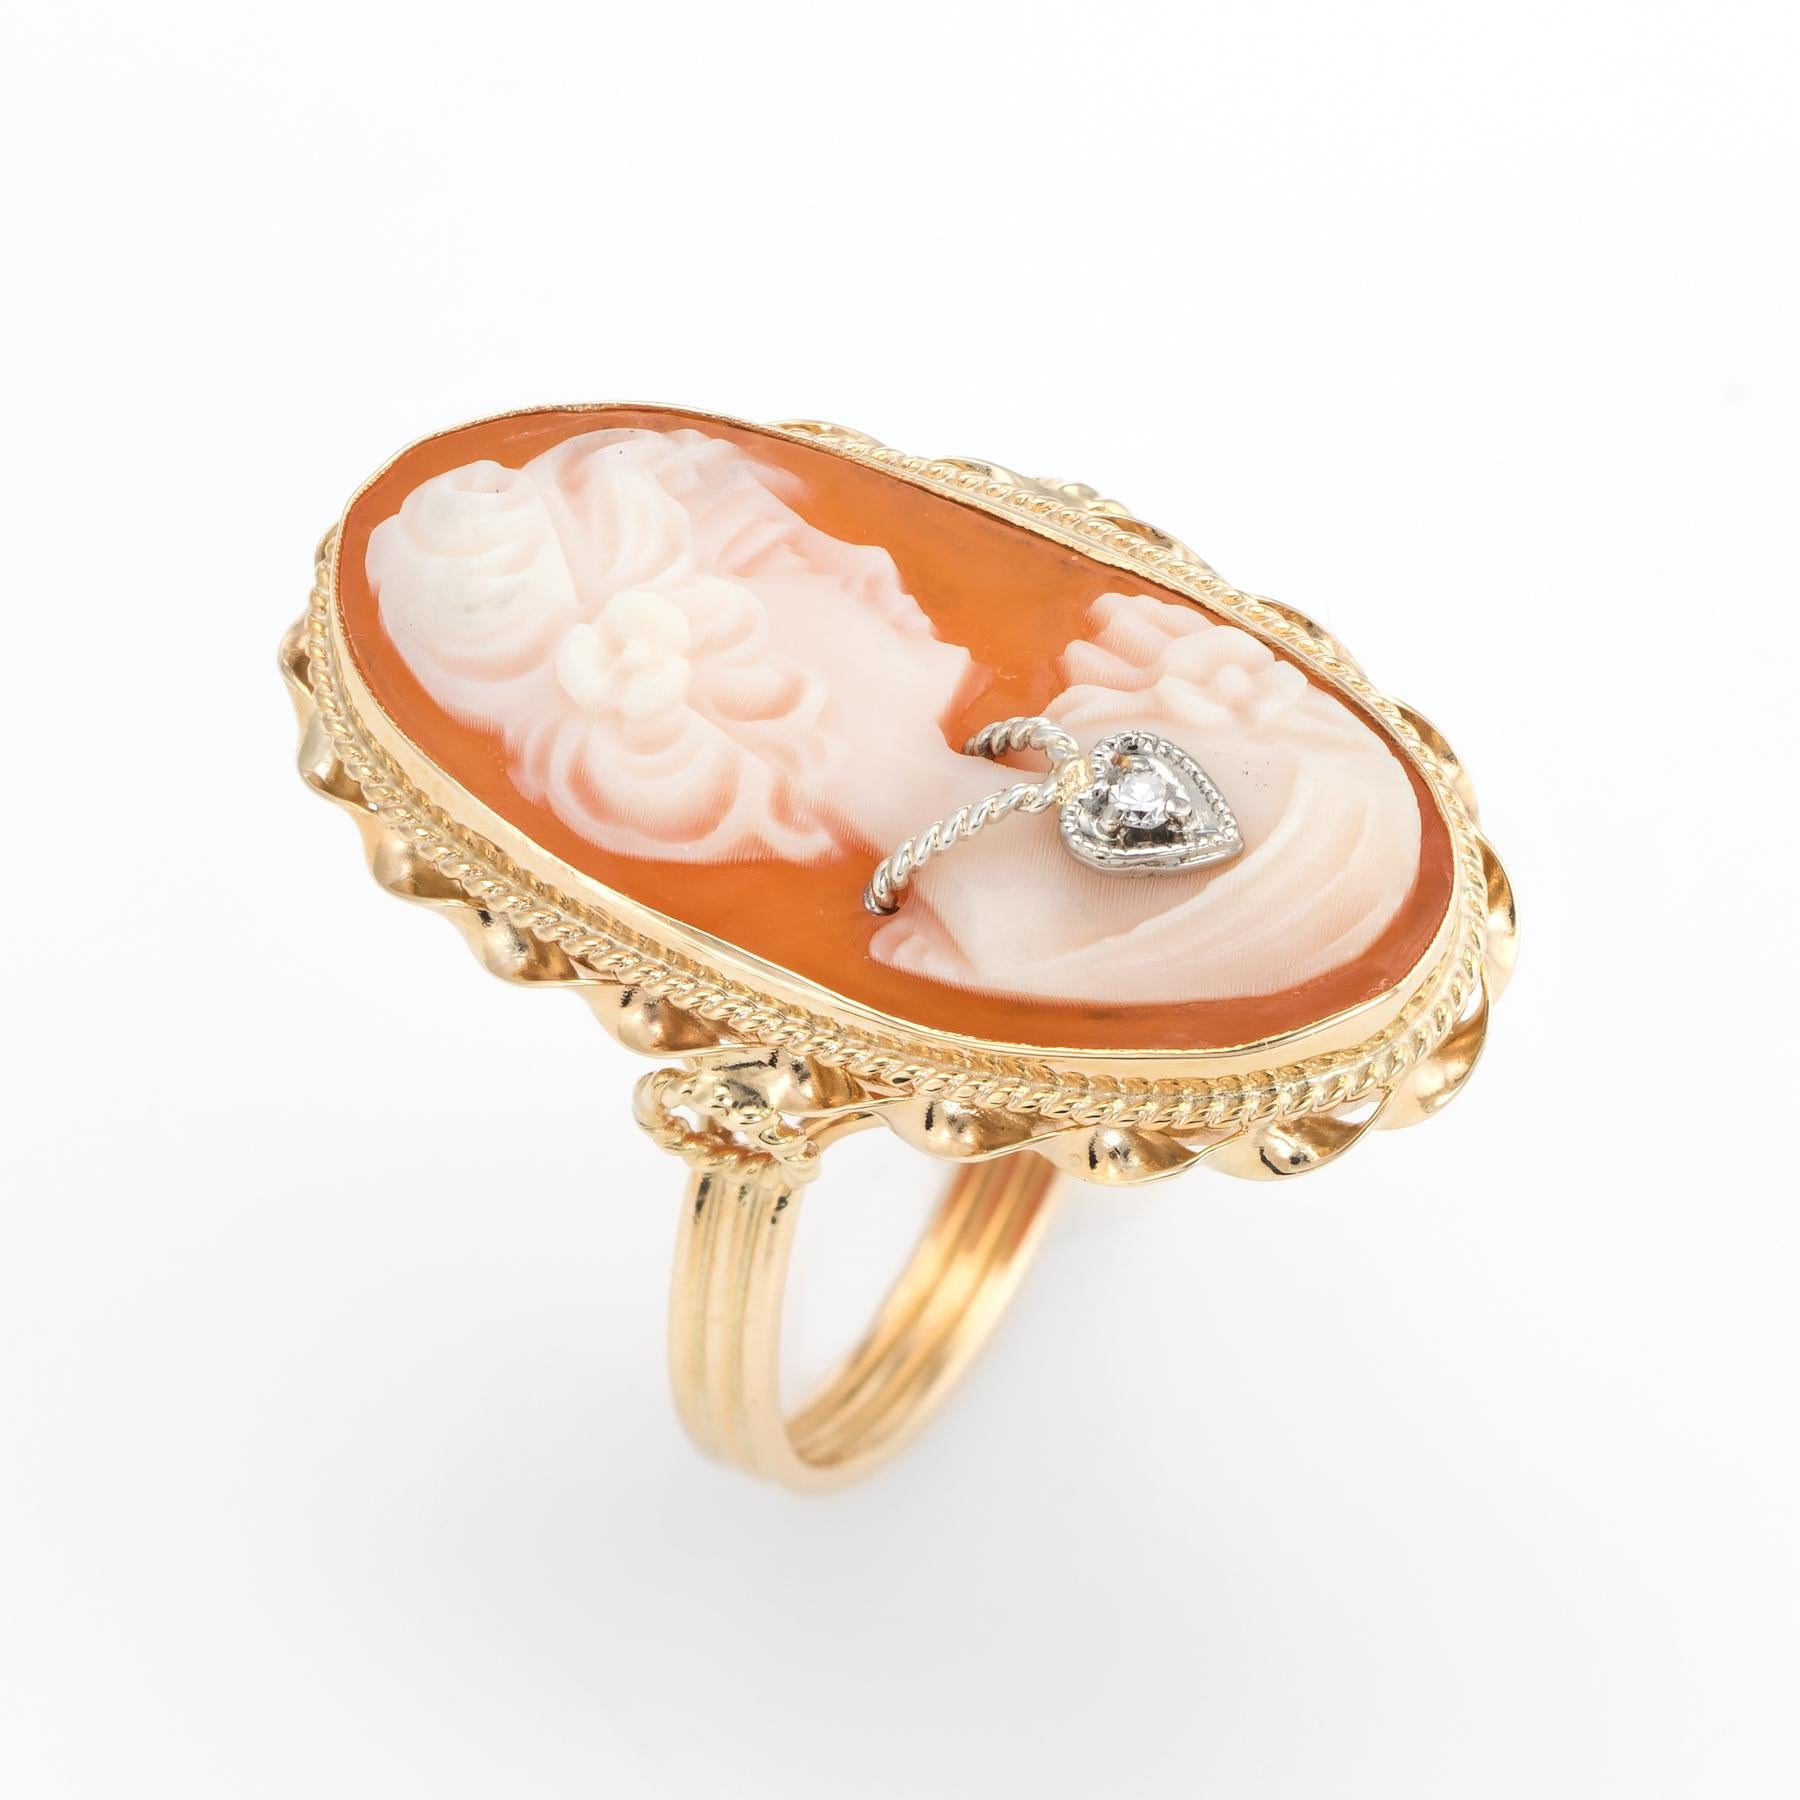 Finely detailed vintage cameo cocktail ring, crafted in 14 karat yellow gold. 

Carved shell cameo features a portrait of a woman, measuring 23mm x 11mm. The cameo is in excellent condition and free of cracks or chips. The single cut diamond is